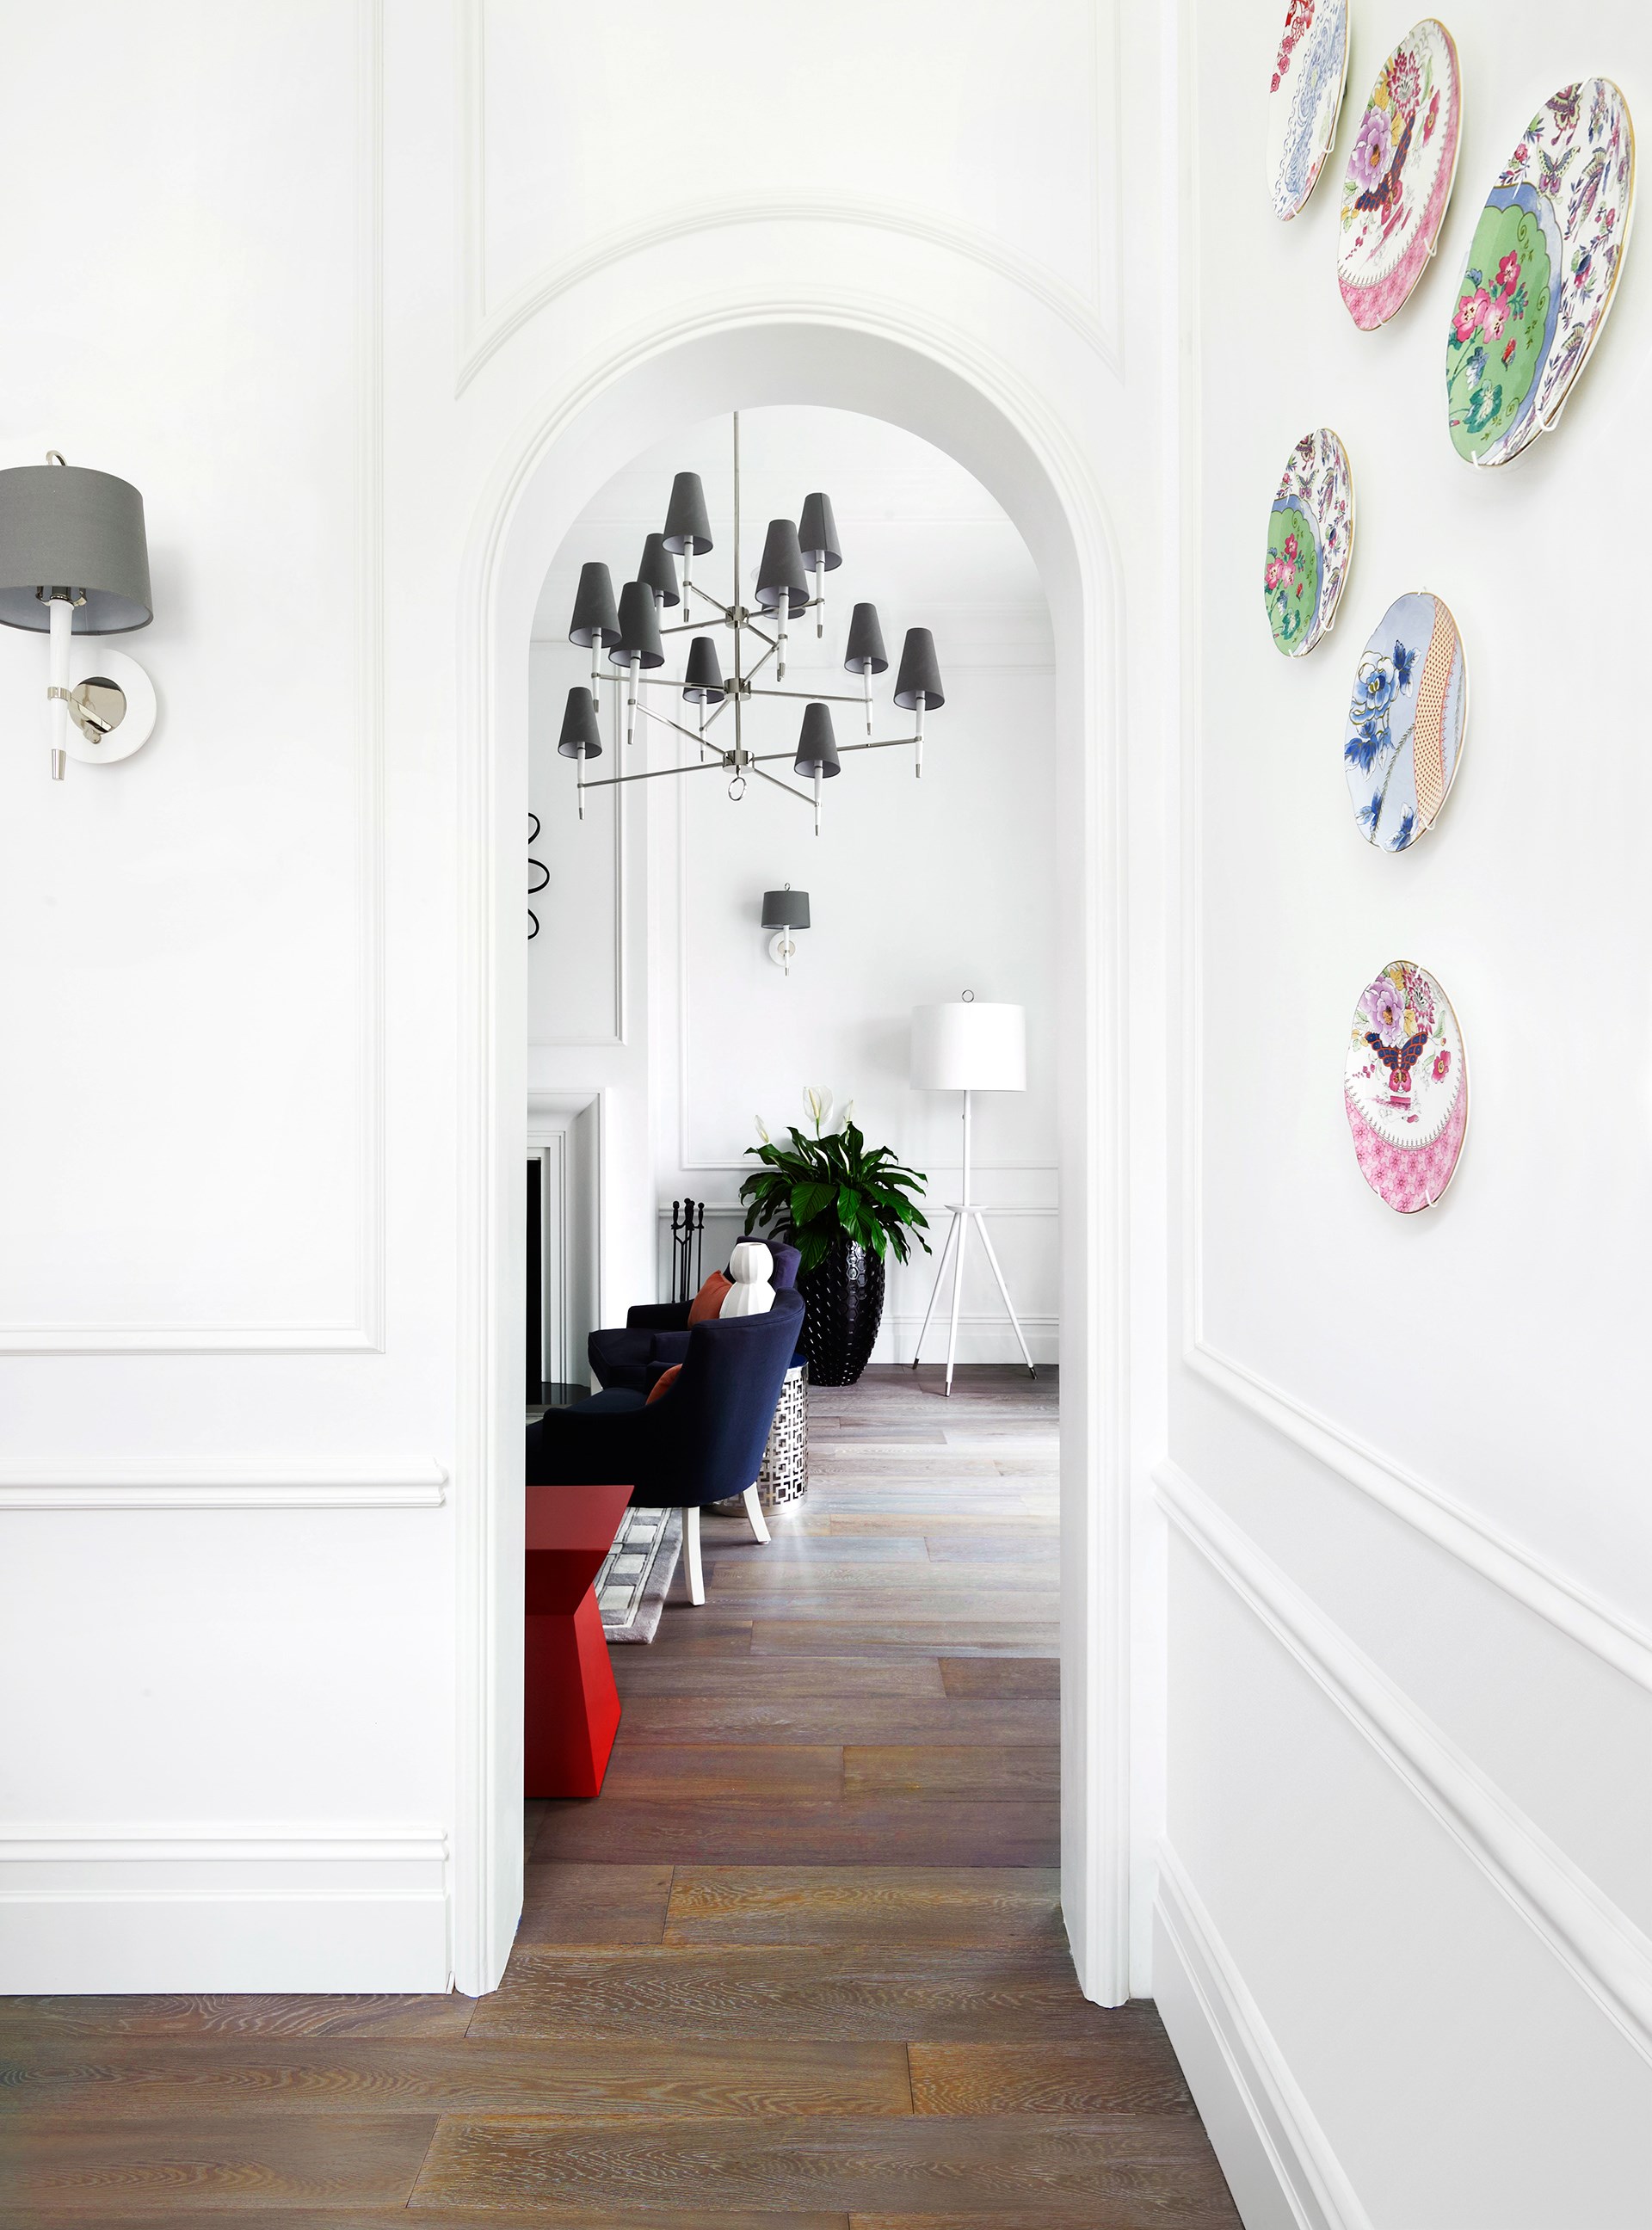 Wall mouldings and arched entrances lend [this luxury family home](http://www.homestolove.com.au/gallery-emma-and-tonis-luxurious-regency-style-home-2311) an early 20th-century French aesthetic, in keeping with the owner's favourite style.